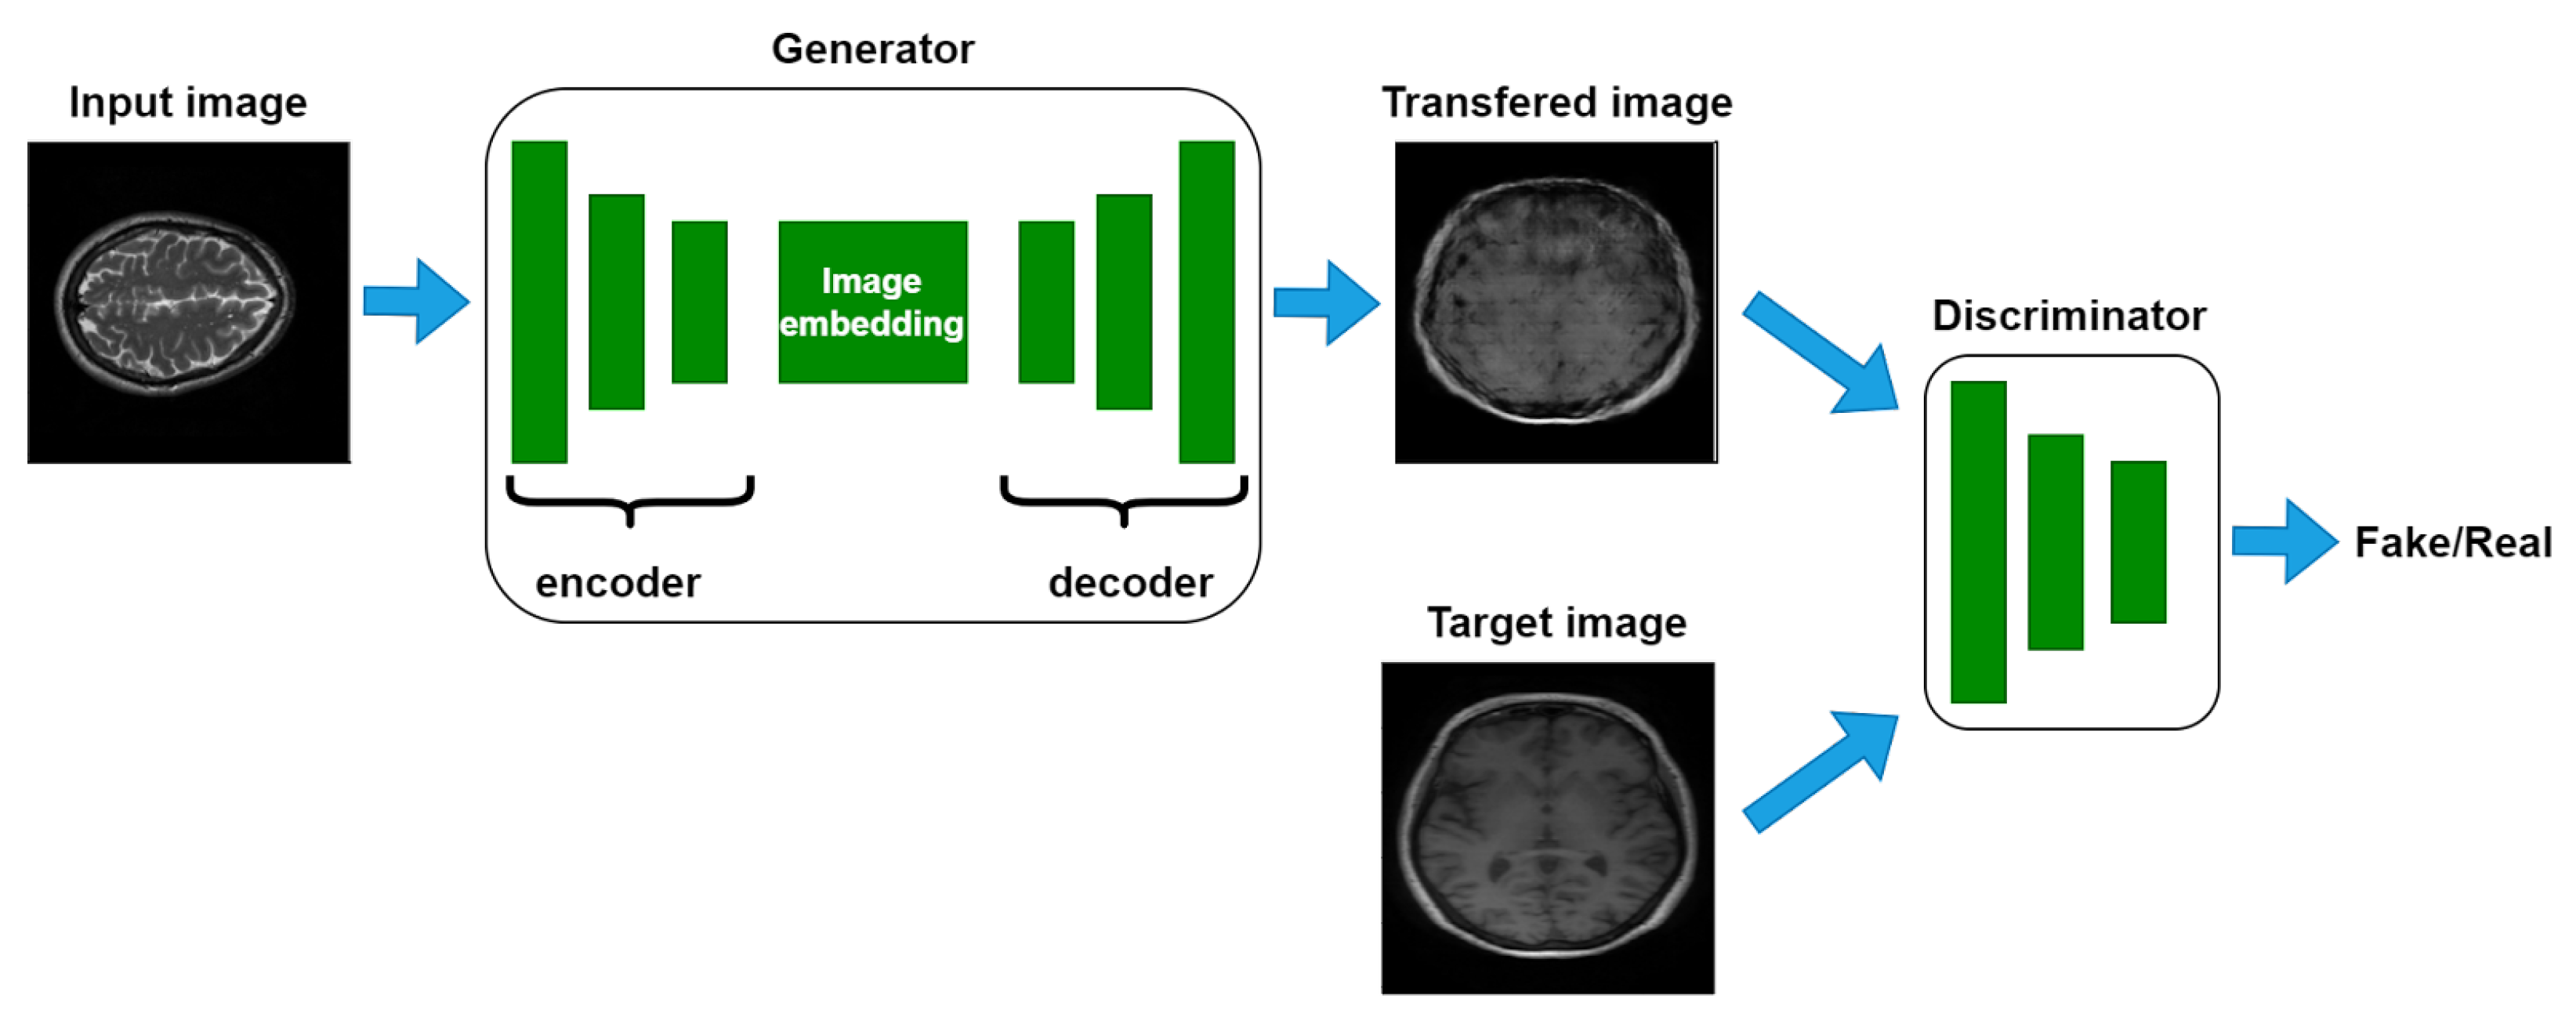 | Free Full-Text | Generating Synthetic Images for Healthcare with Novel Deep Pix2Pix GAN